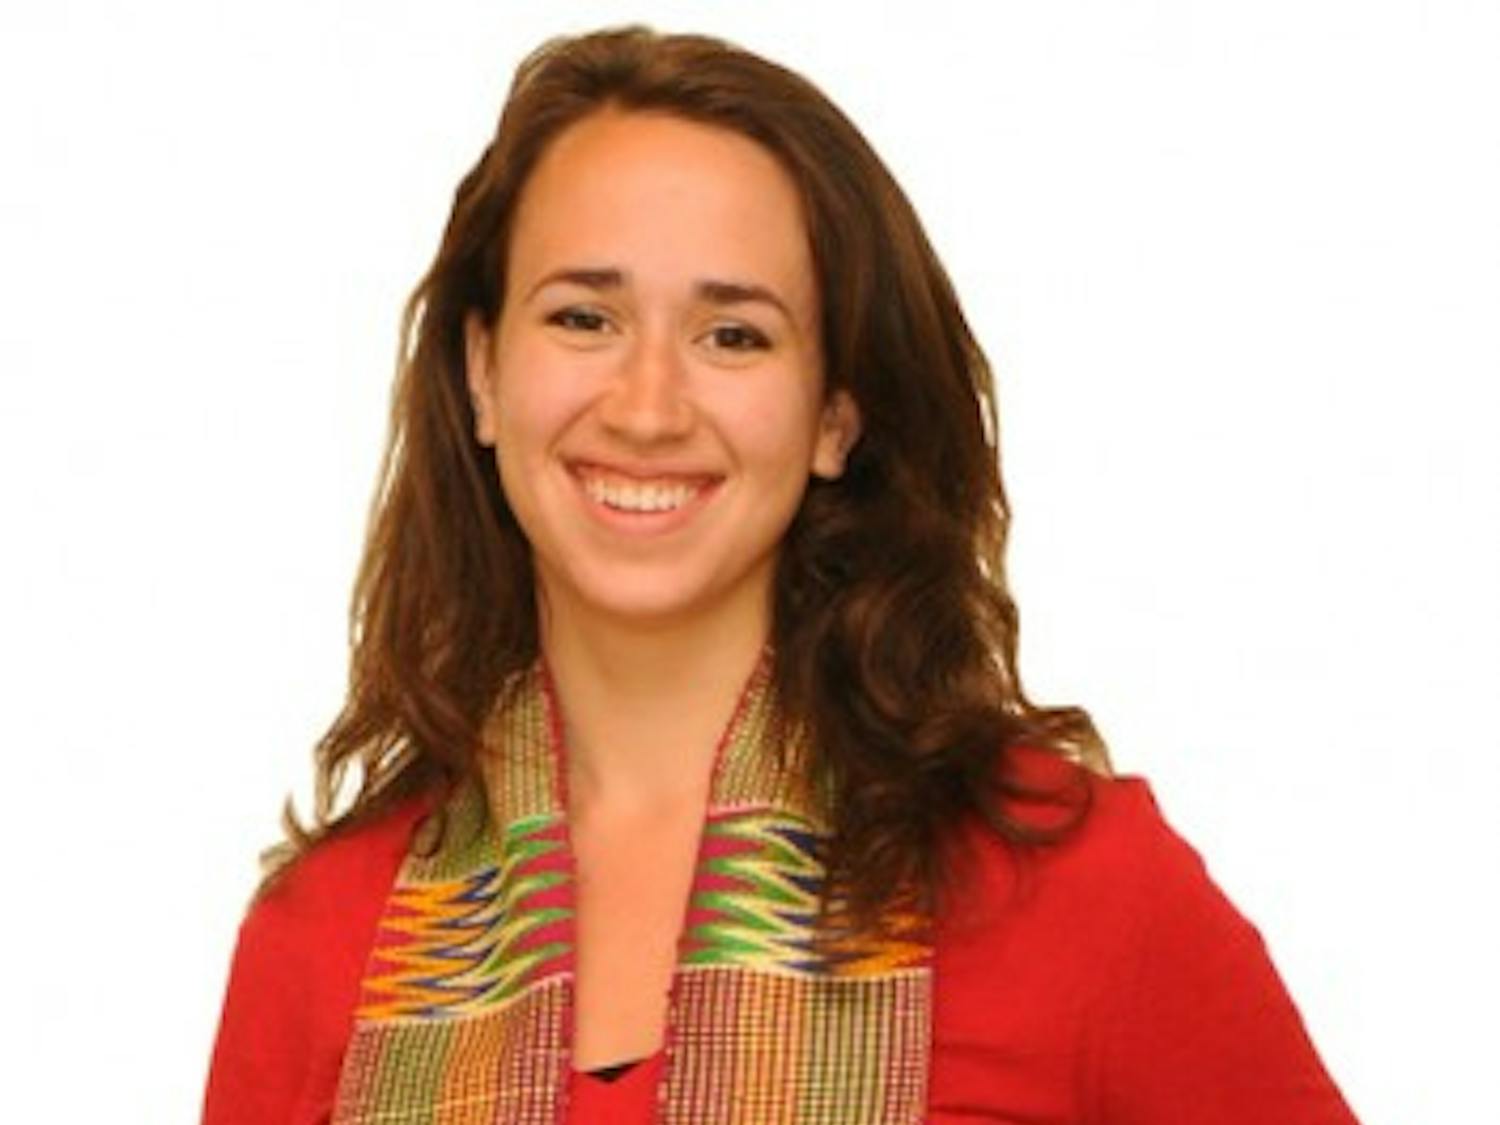 Julia Marks '09 volunteered with the Ministry of Finance in Ghana.